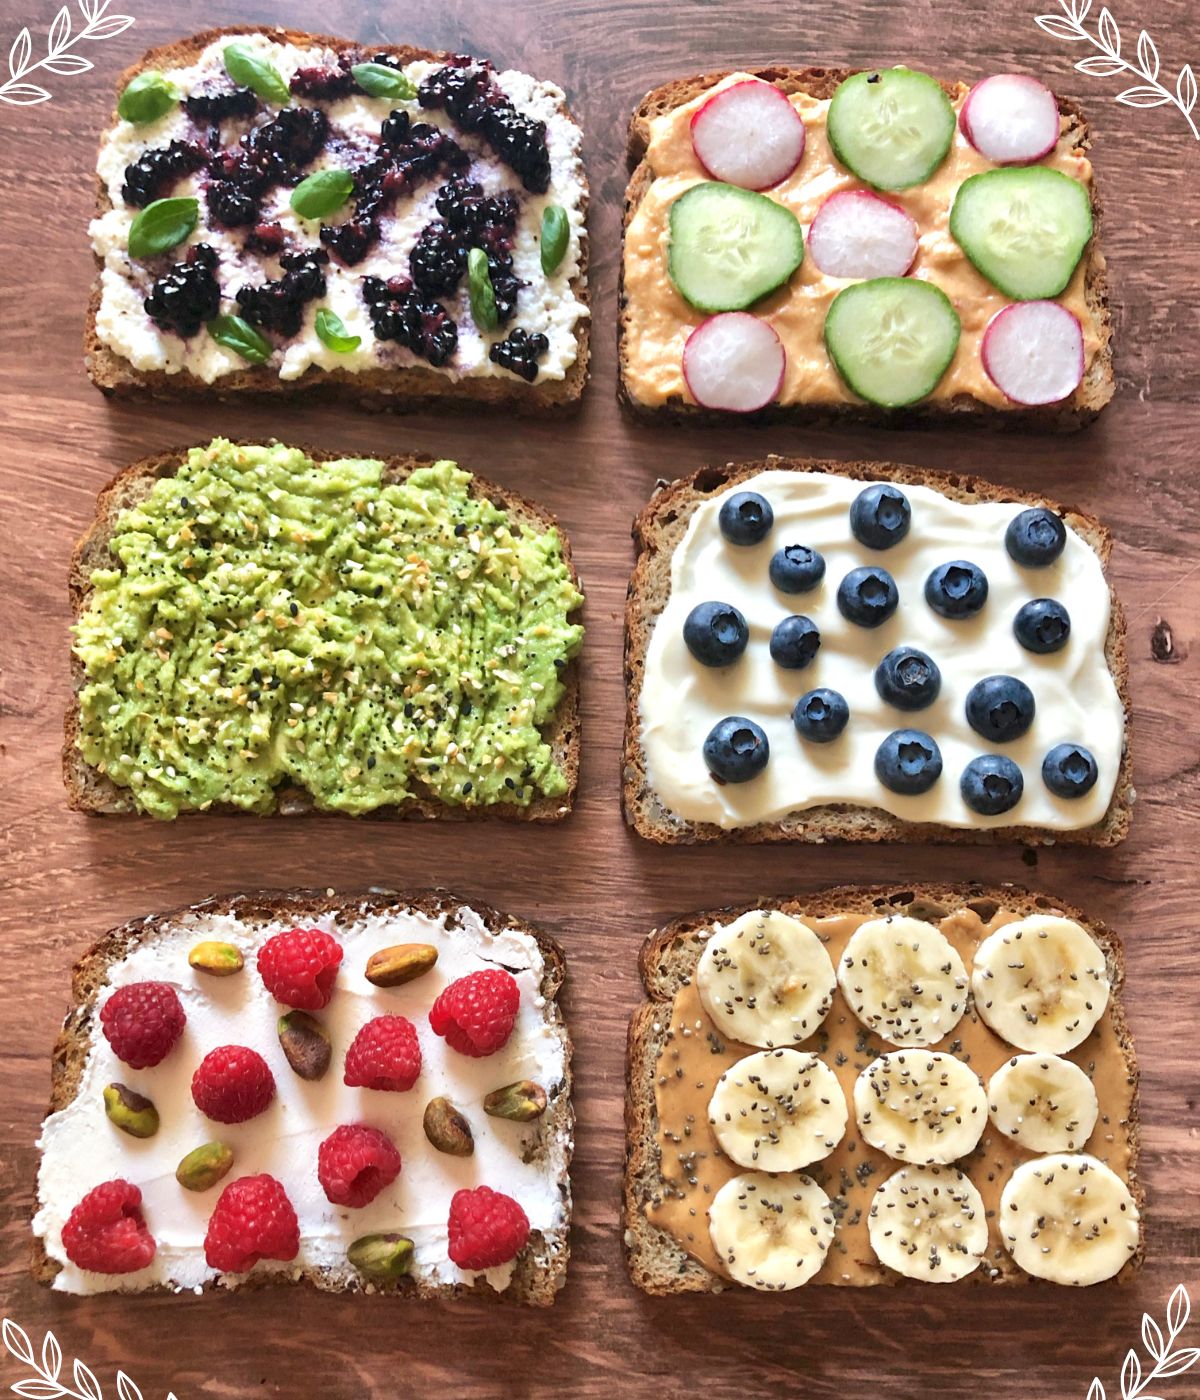 six pieces of toast, on a wooden table all with various toppings.
